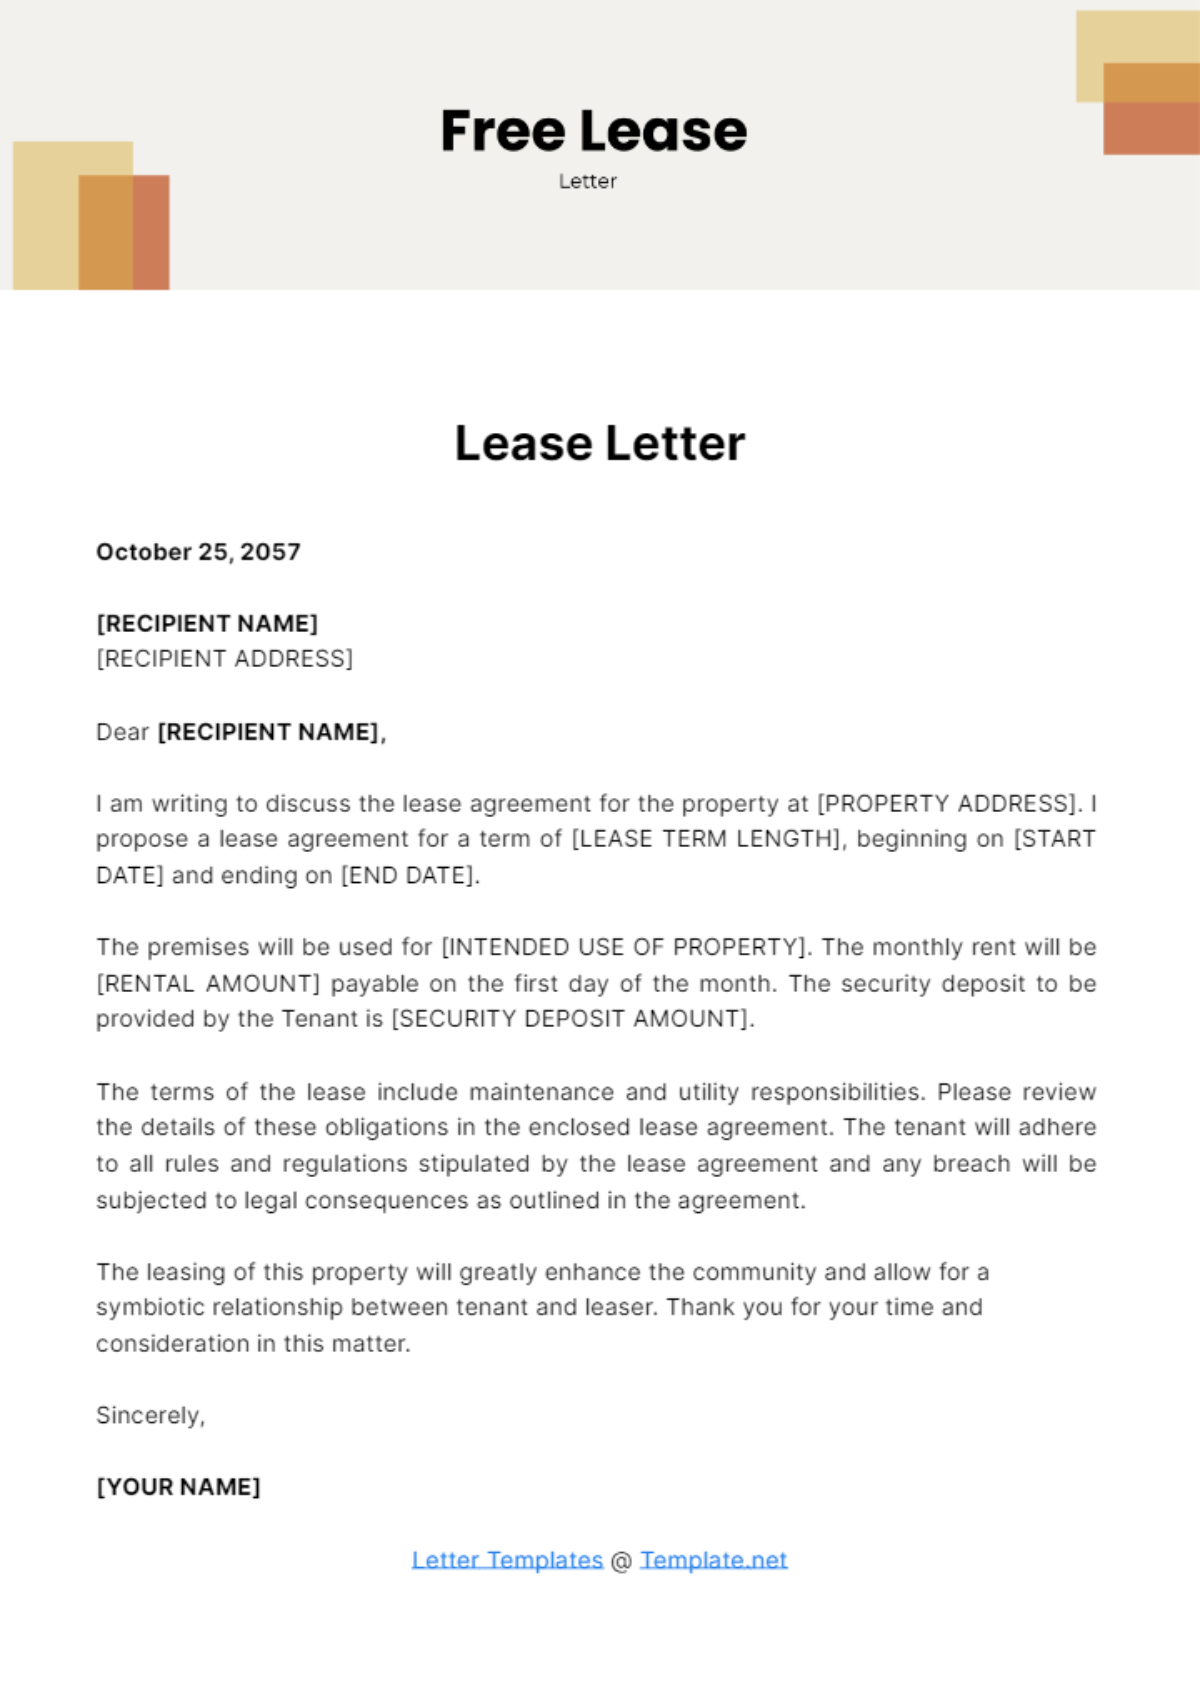 Free Lease Letter Template